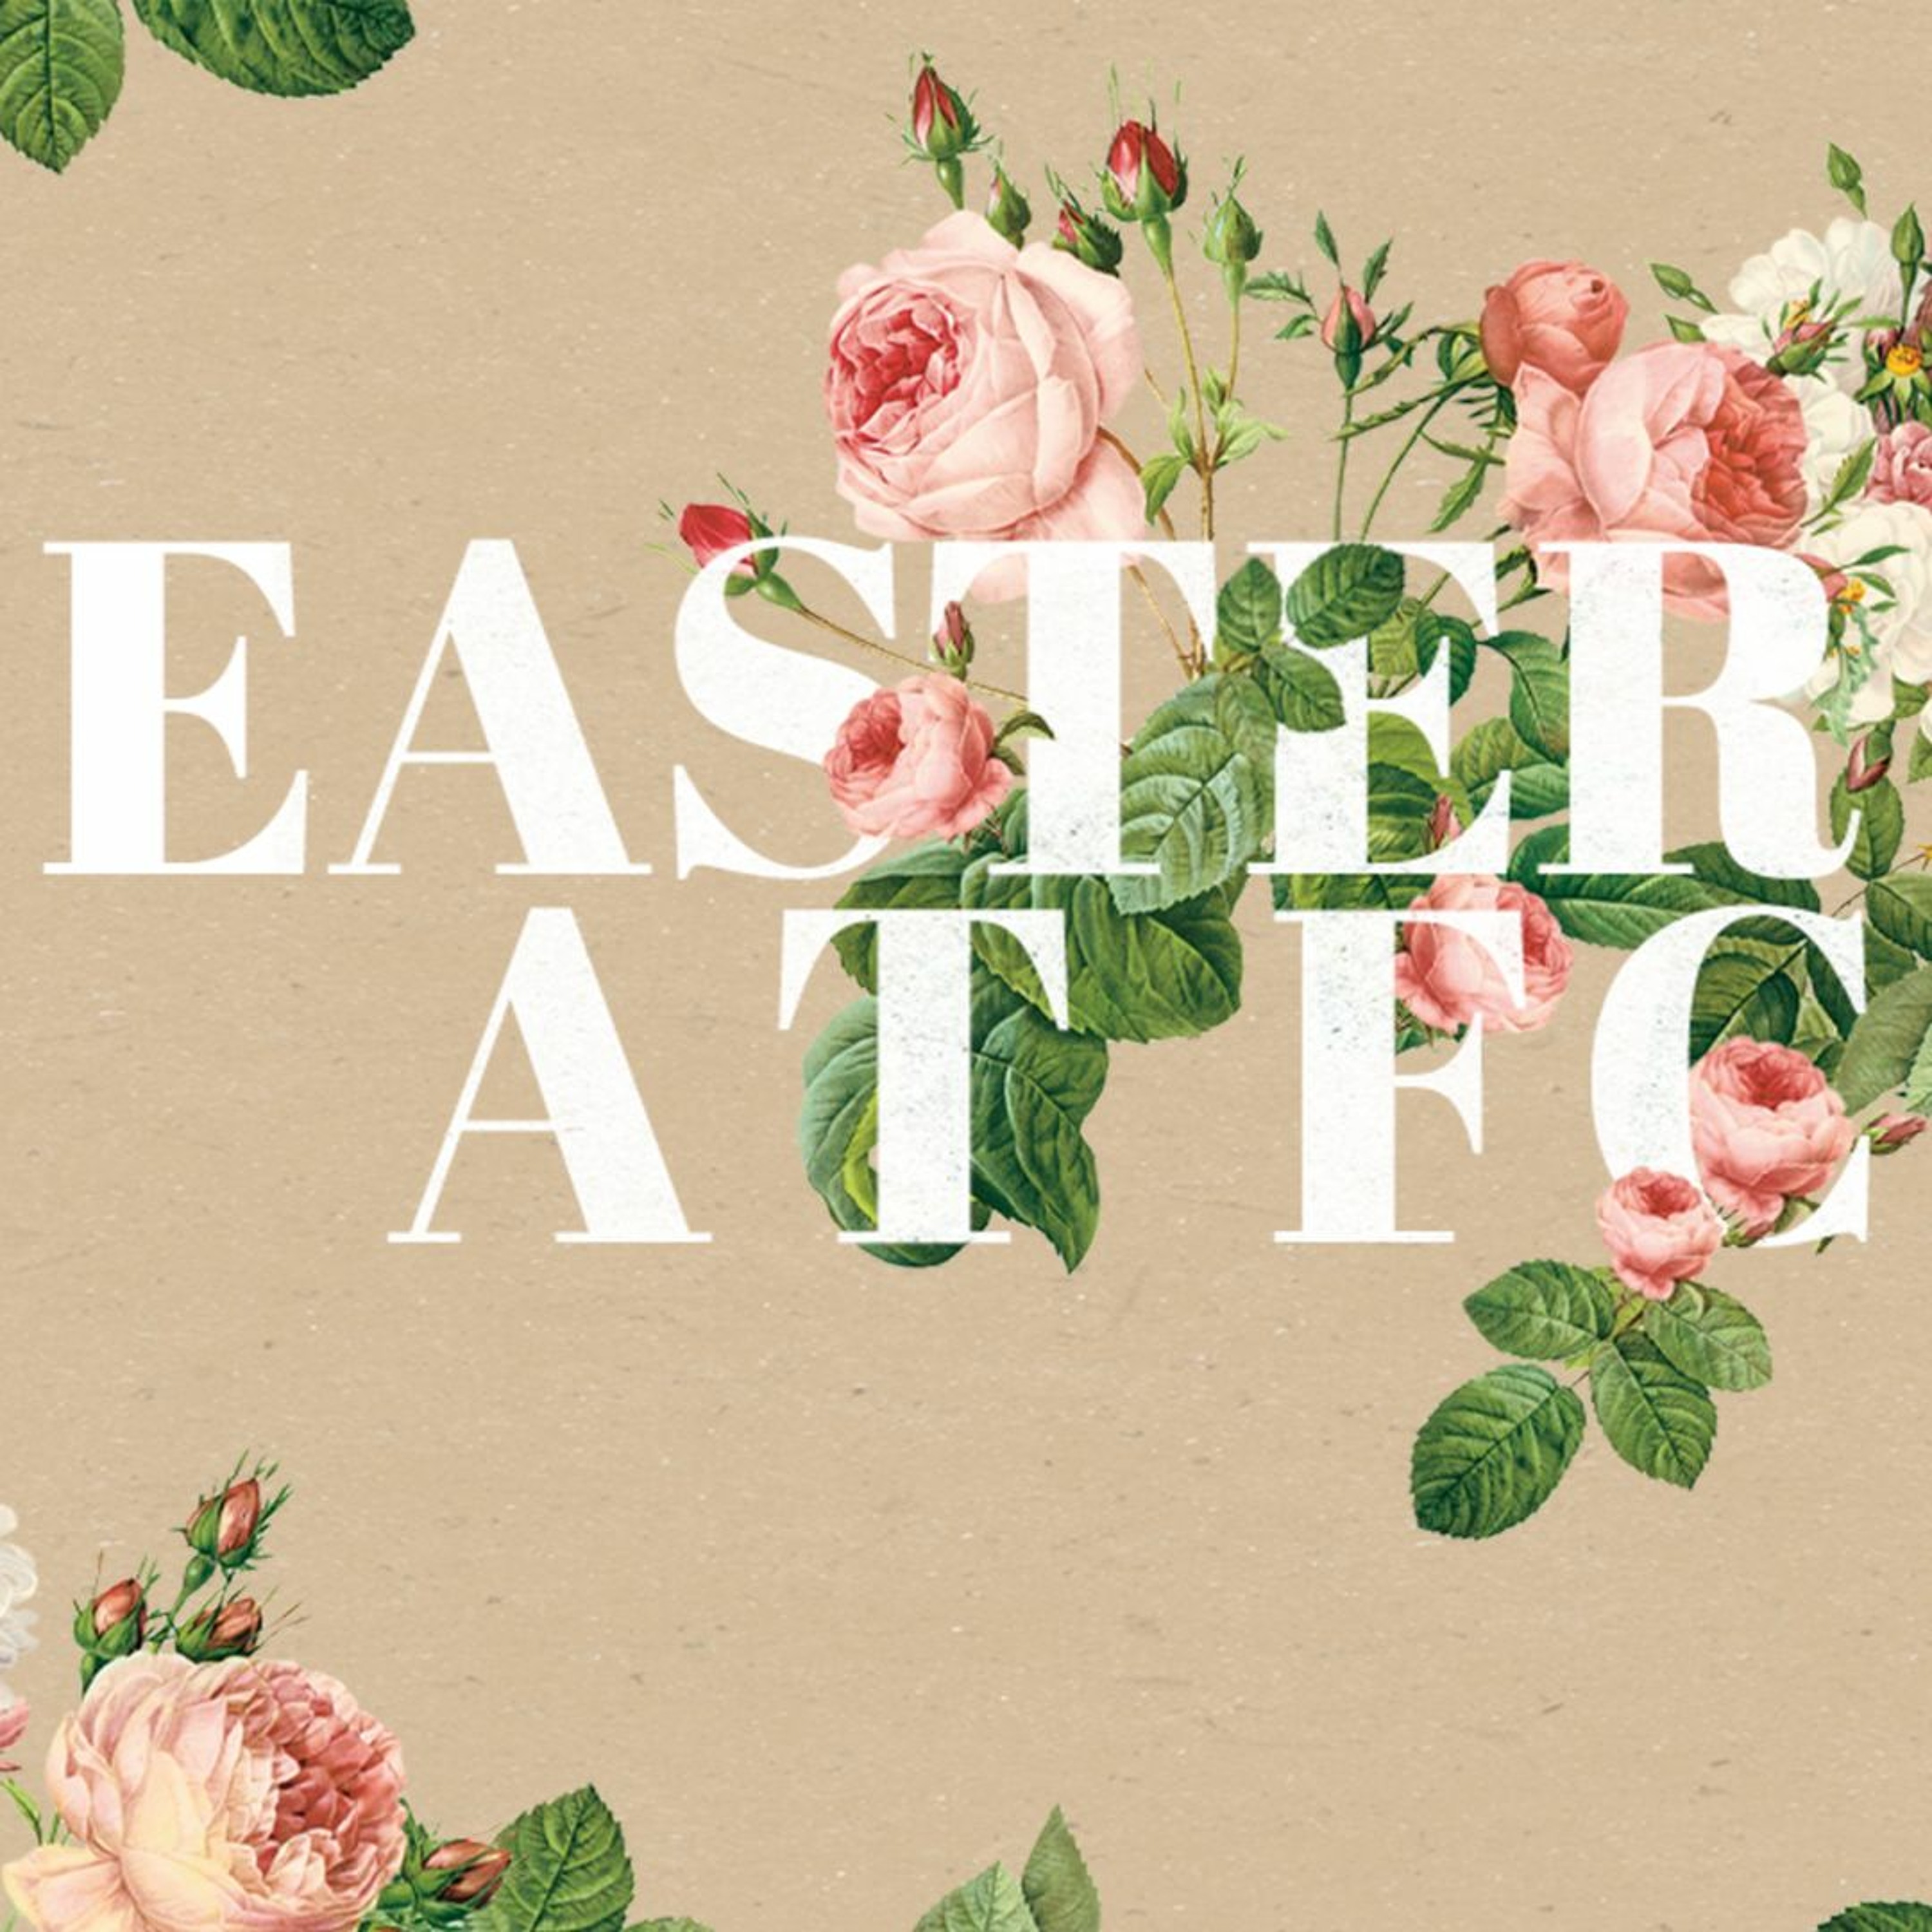 Easter at FCC | Ethan Magness